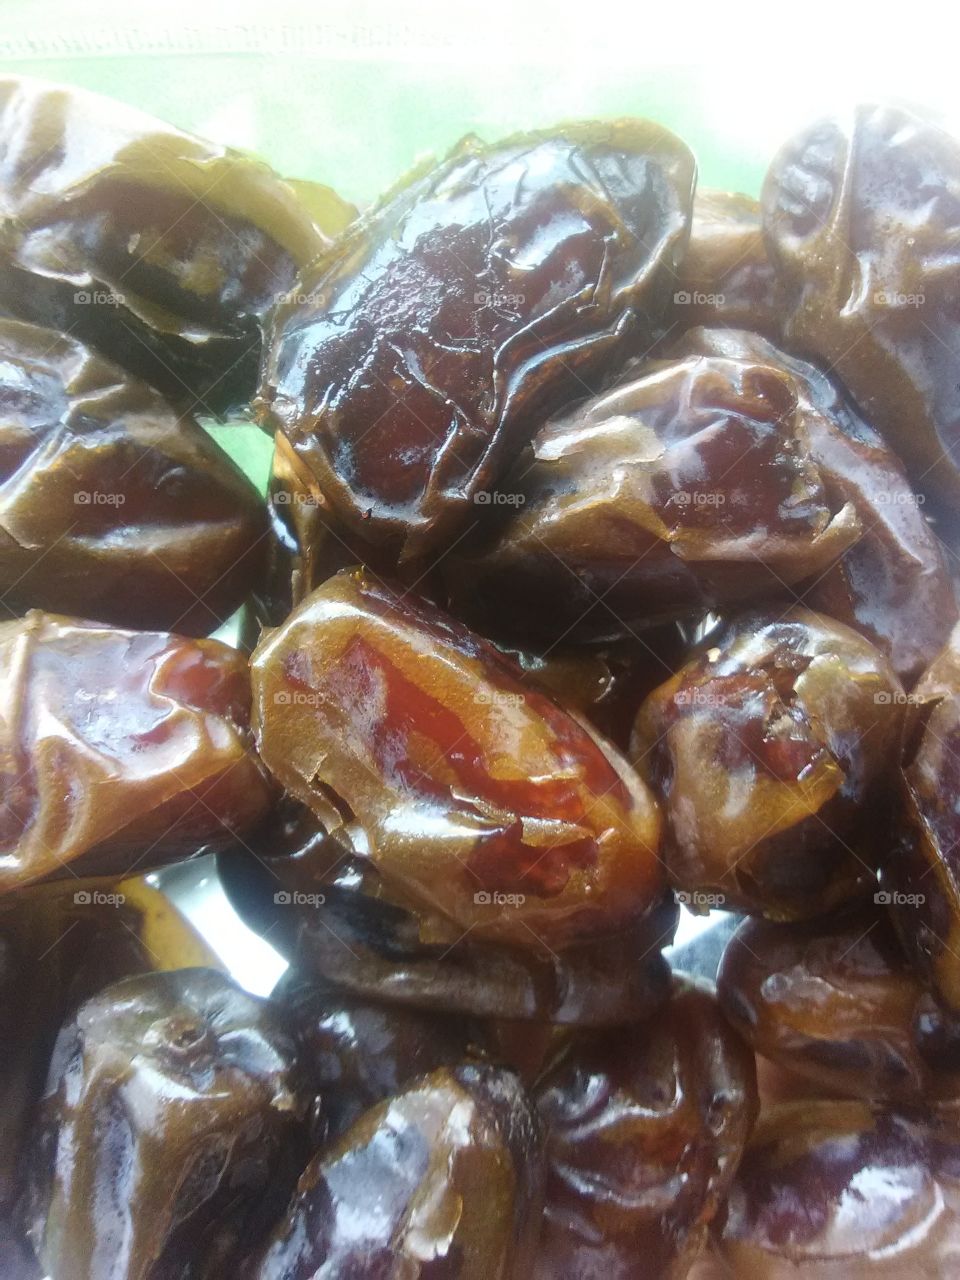 fresh and soft dates so delicious and sweet I love adding these to so many recipes.